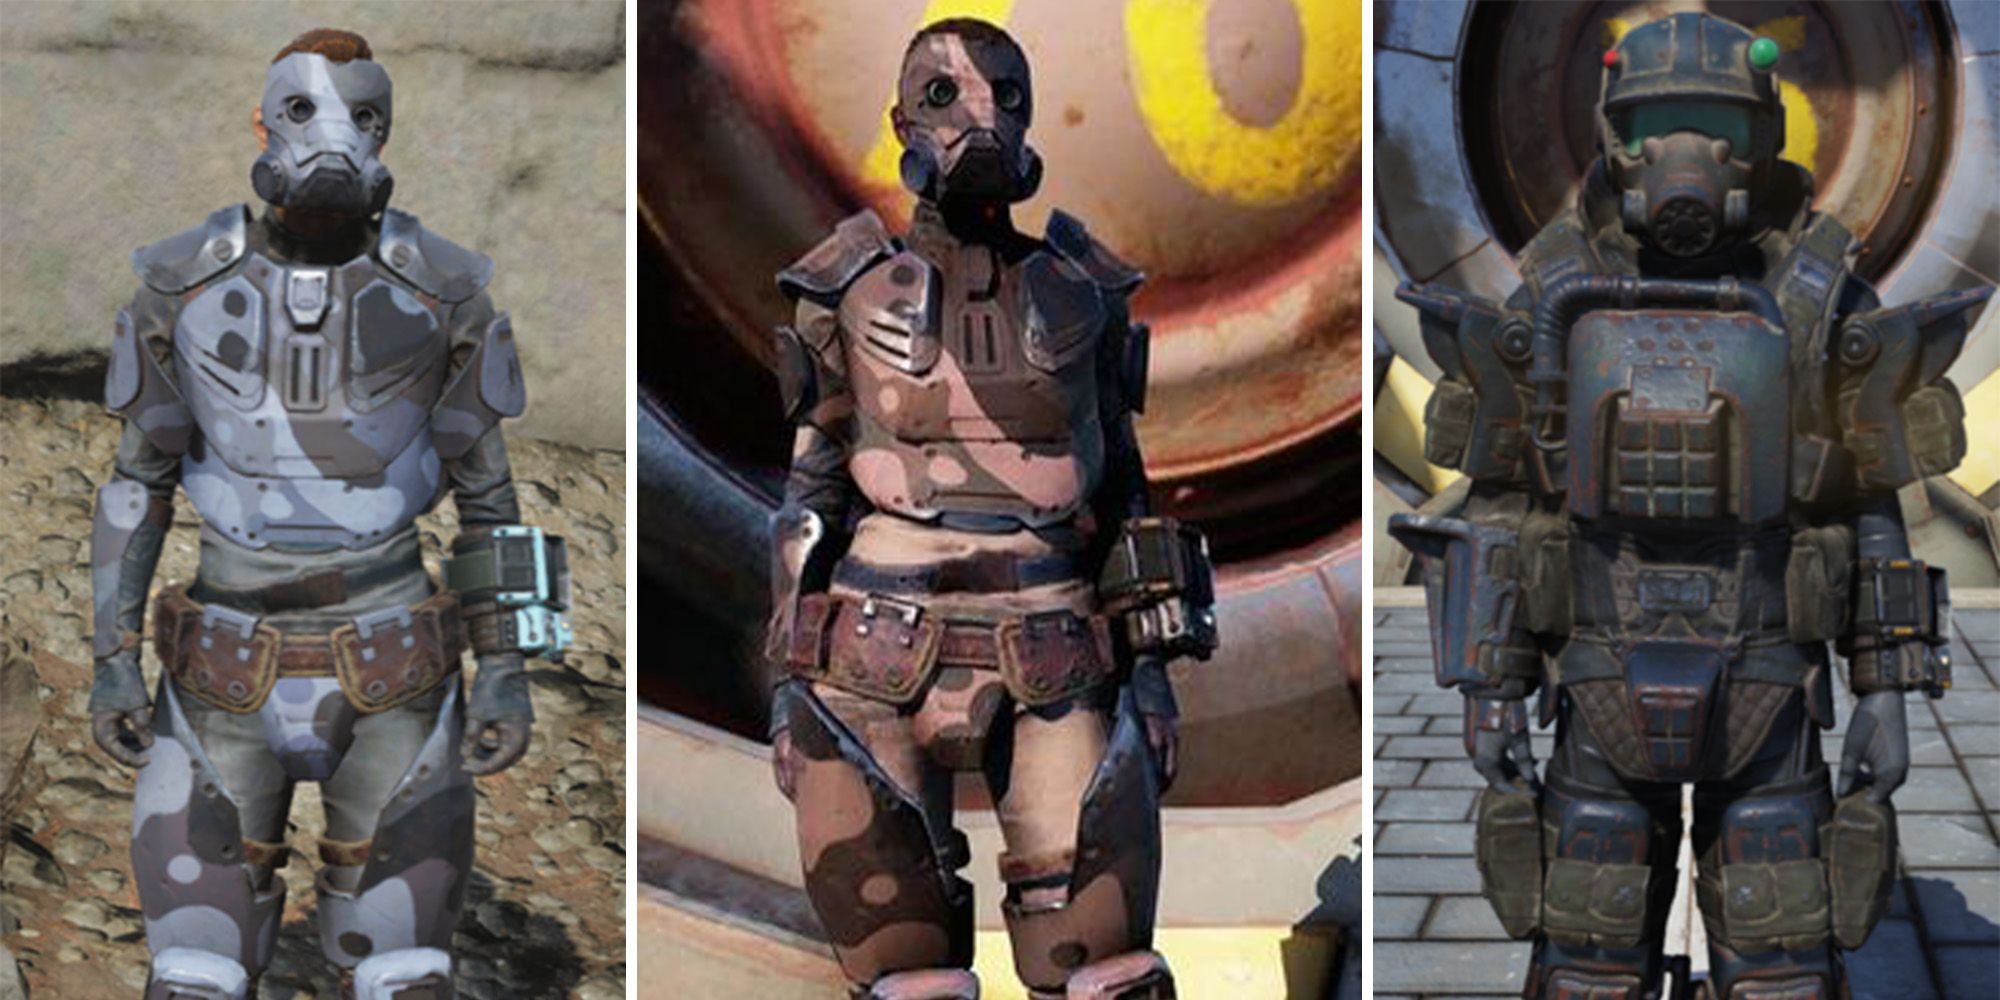 The best armors for Bloodied builds in Fallout 76 including the Urban Scout Armor, The Forest Scout Armor, and the Marine Armor.